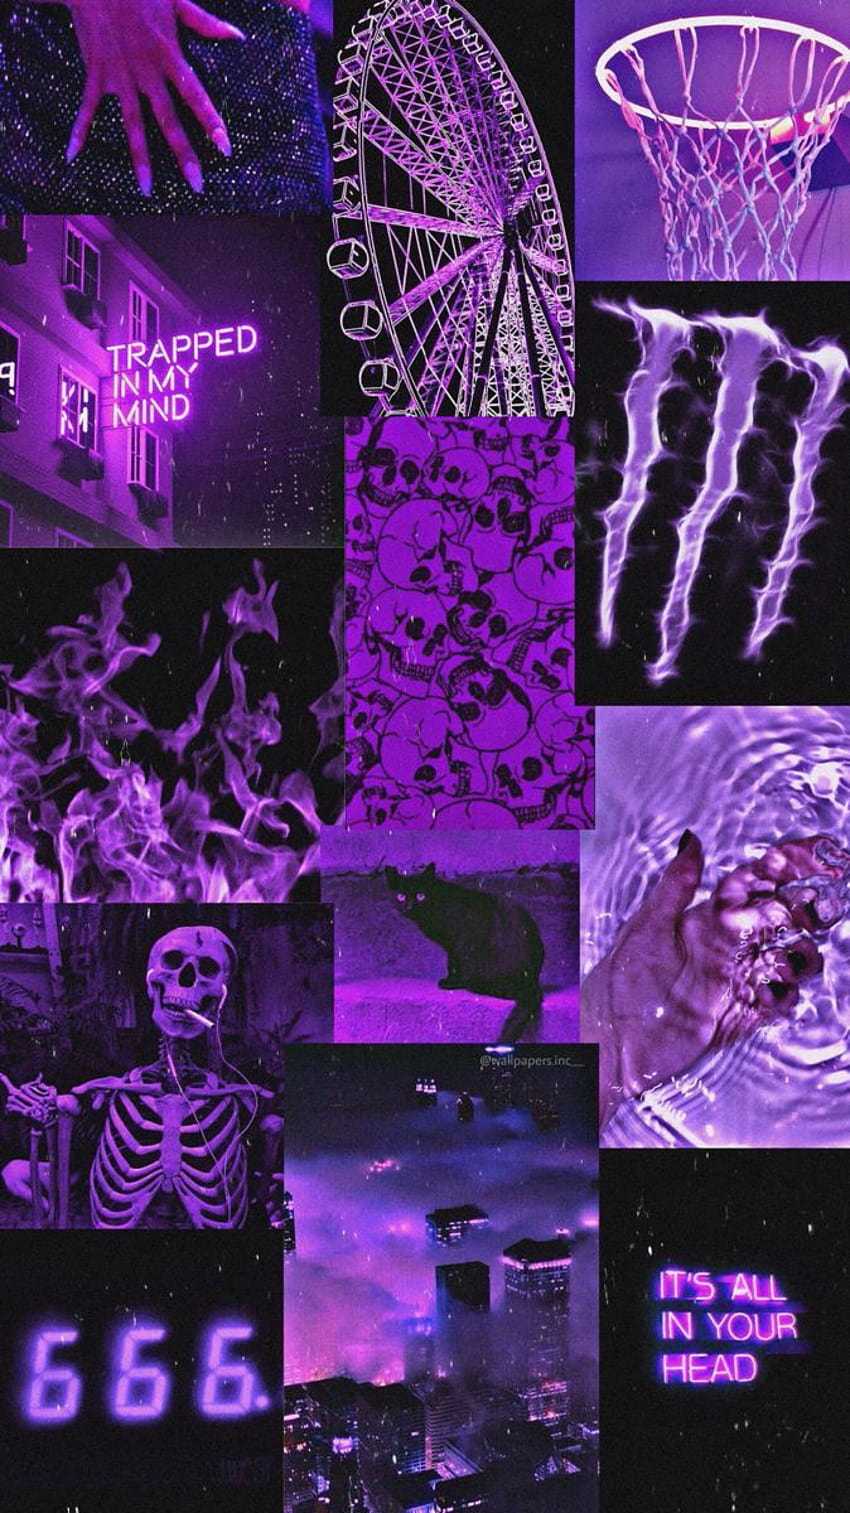 Download Black And Purple Aesthetic Vibe Wallpaper